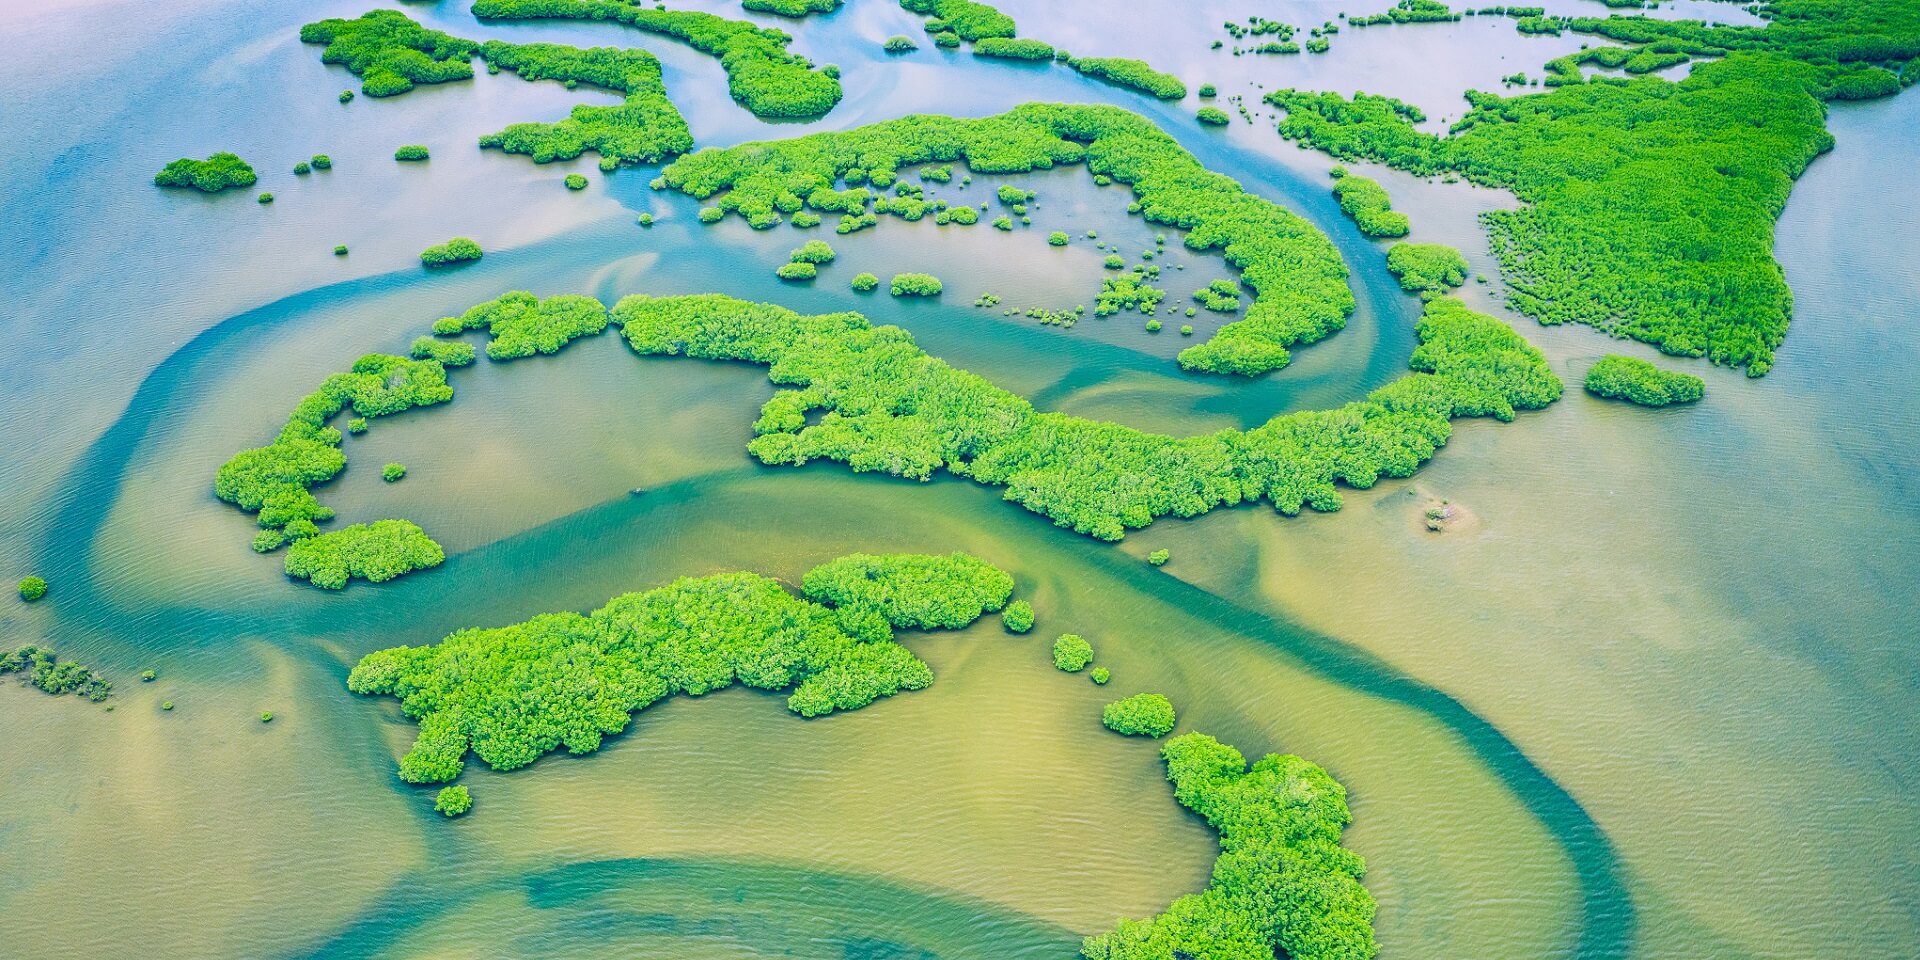 Footer Senegal Mangroves. Aerial view of mangrove forest in the Saloum Delta National Park, Joal Fadiout,